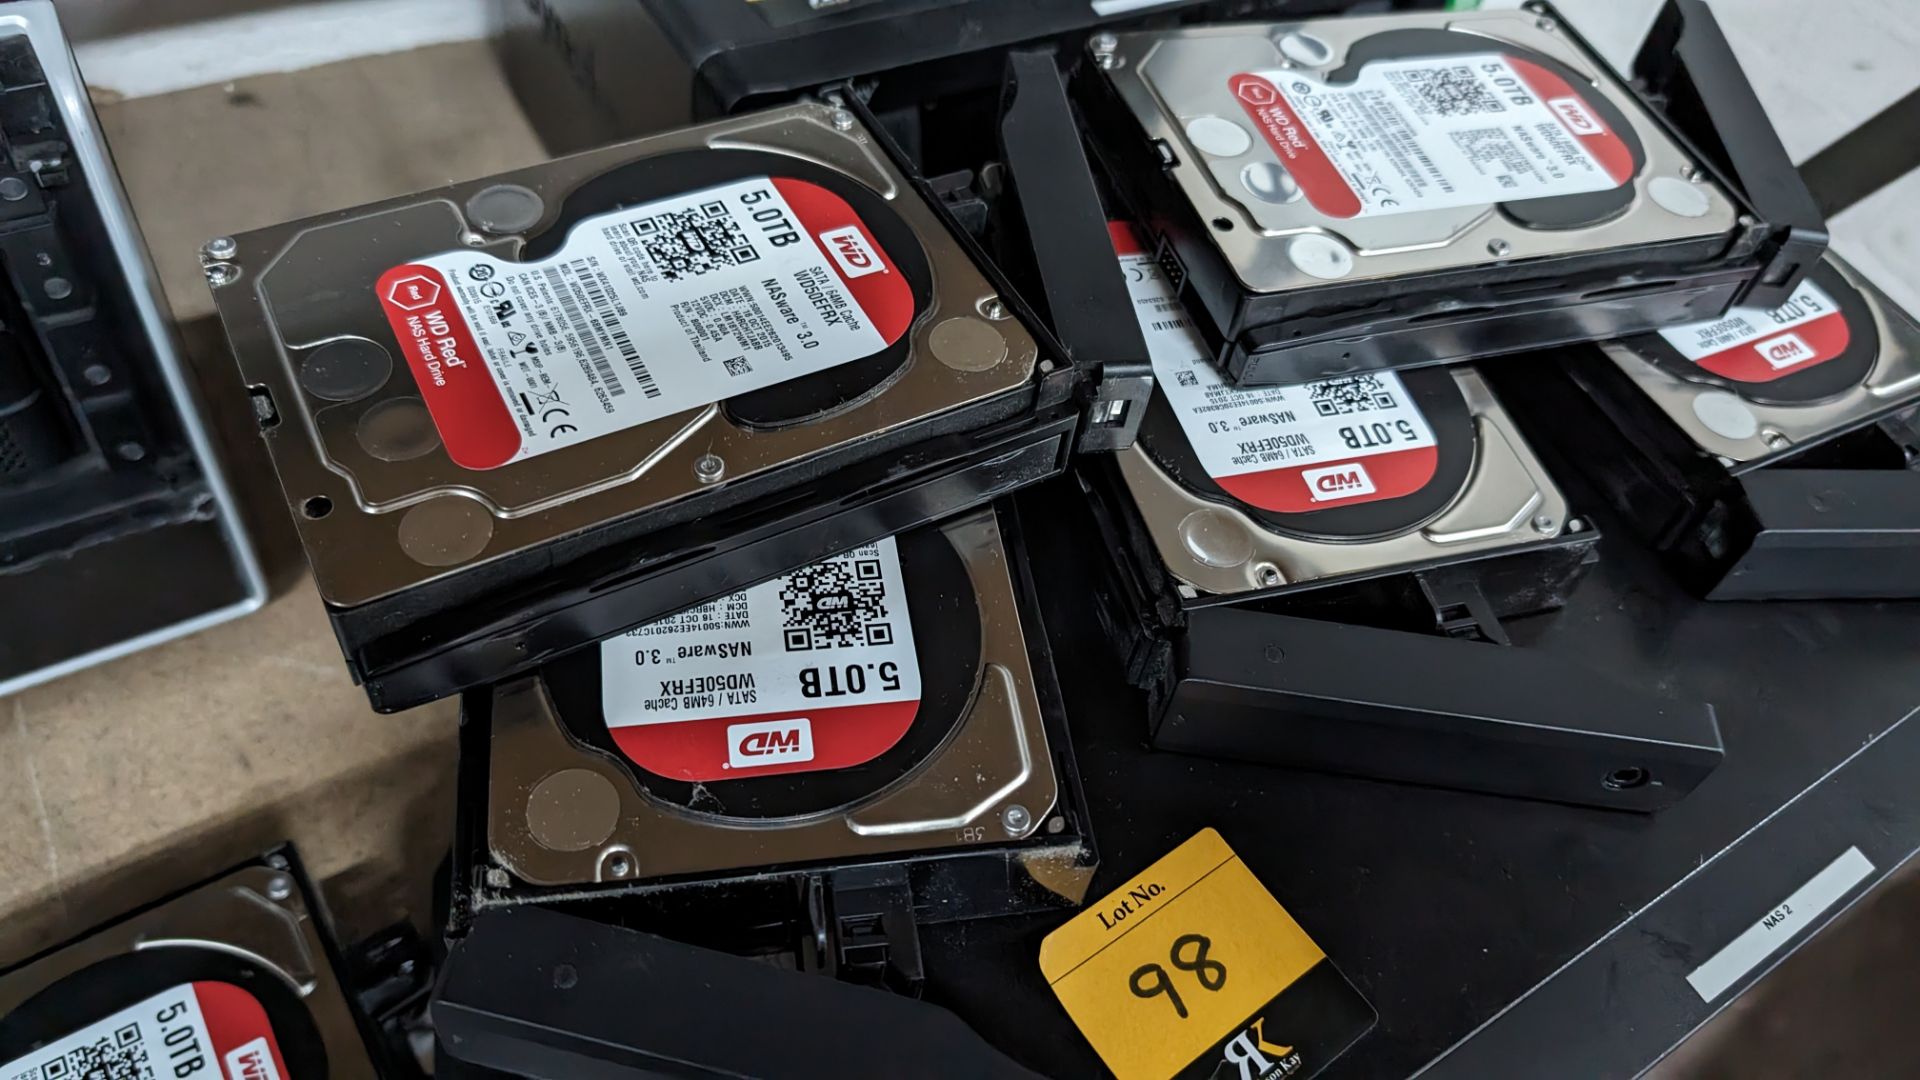 NAS drive with 8 x 5TB hard drives - Image 13 of 15